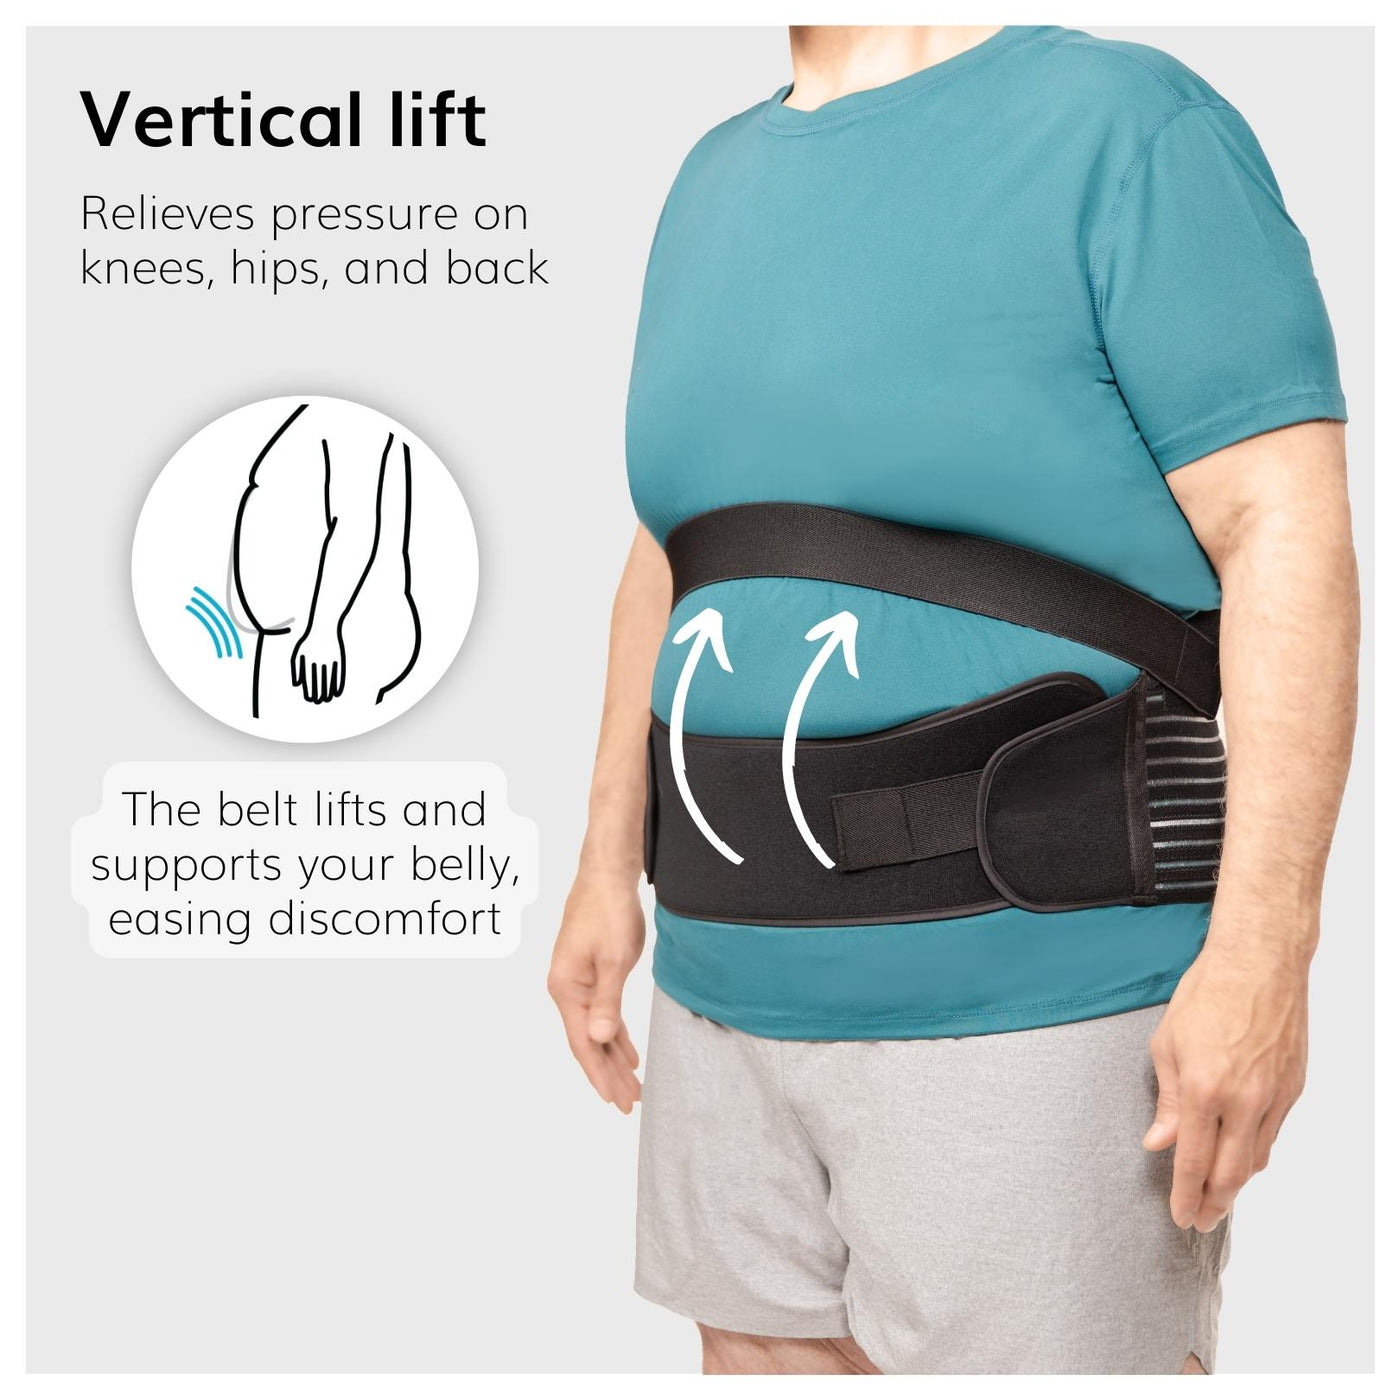 SWEAT BELT REVIEW VIDEO! Does it work? Exercise and fitness belt 